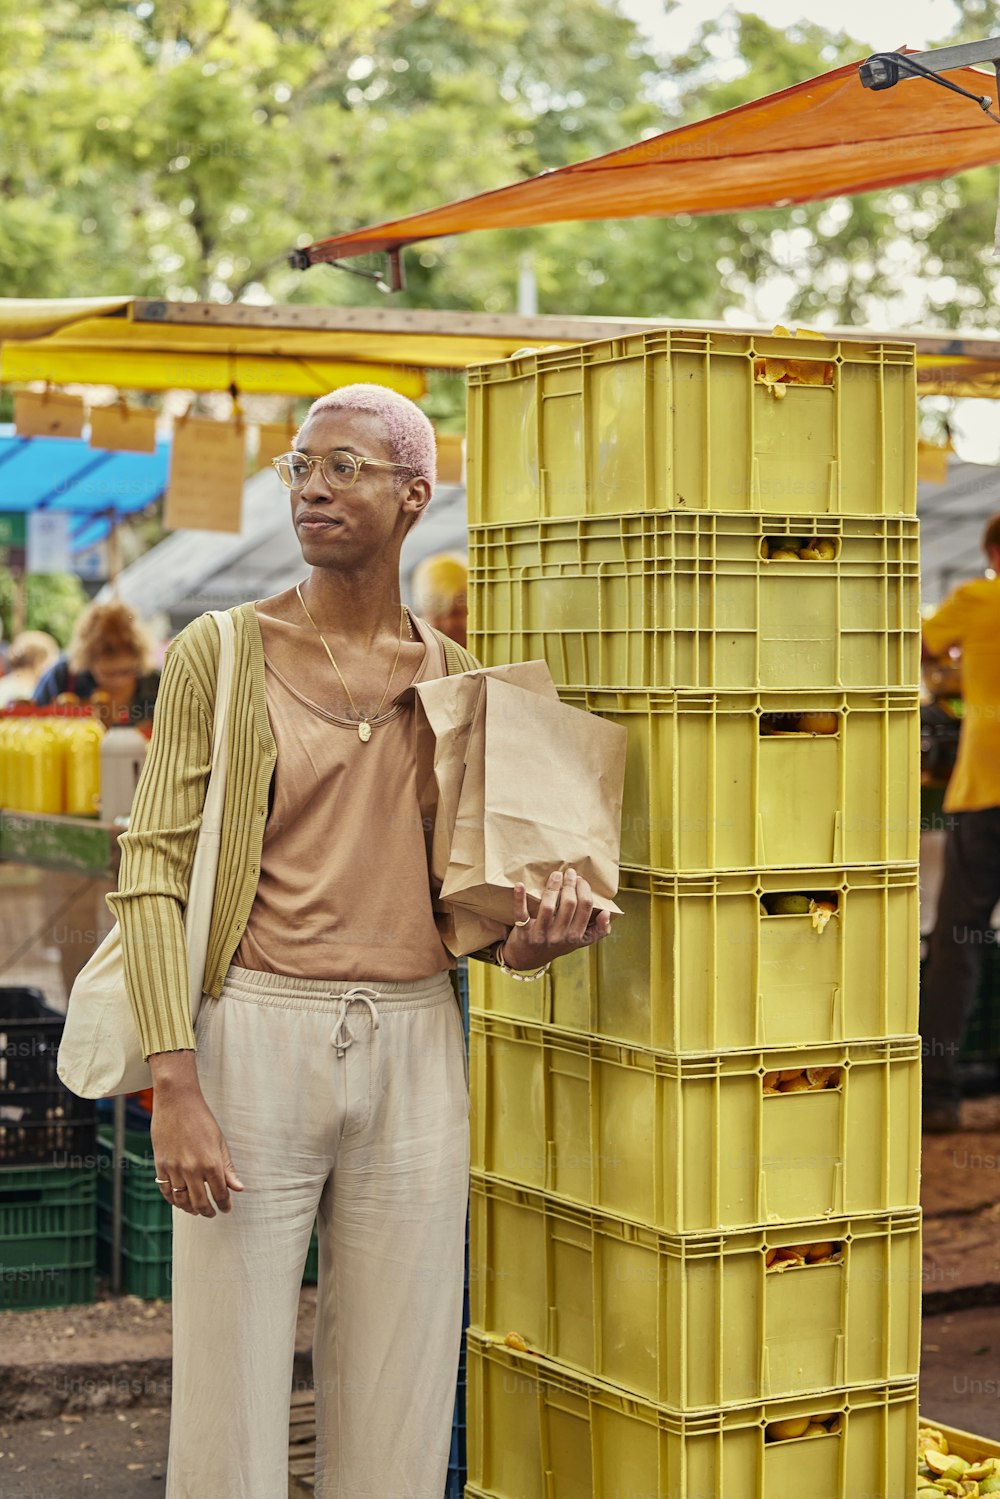 a man standing next to a yellow crate